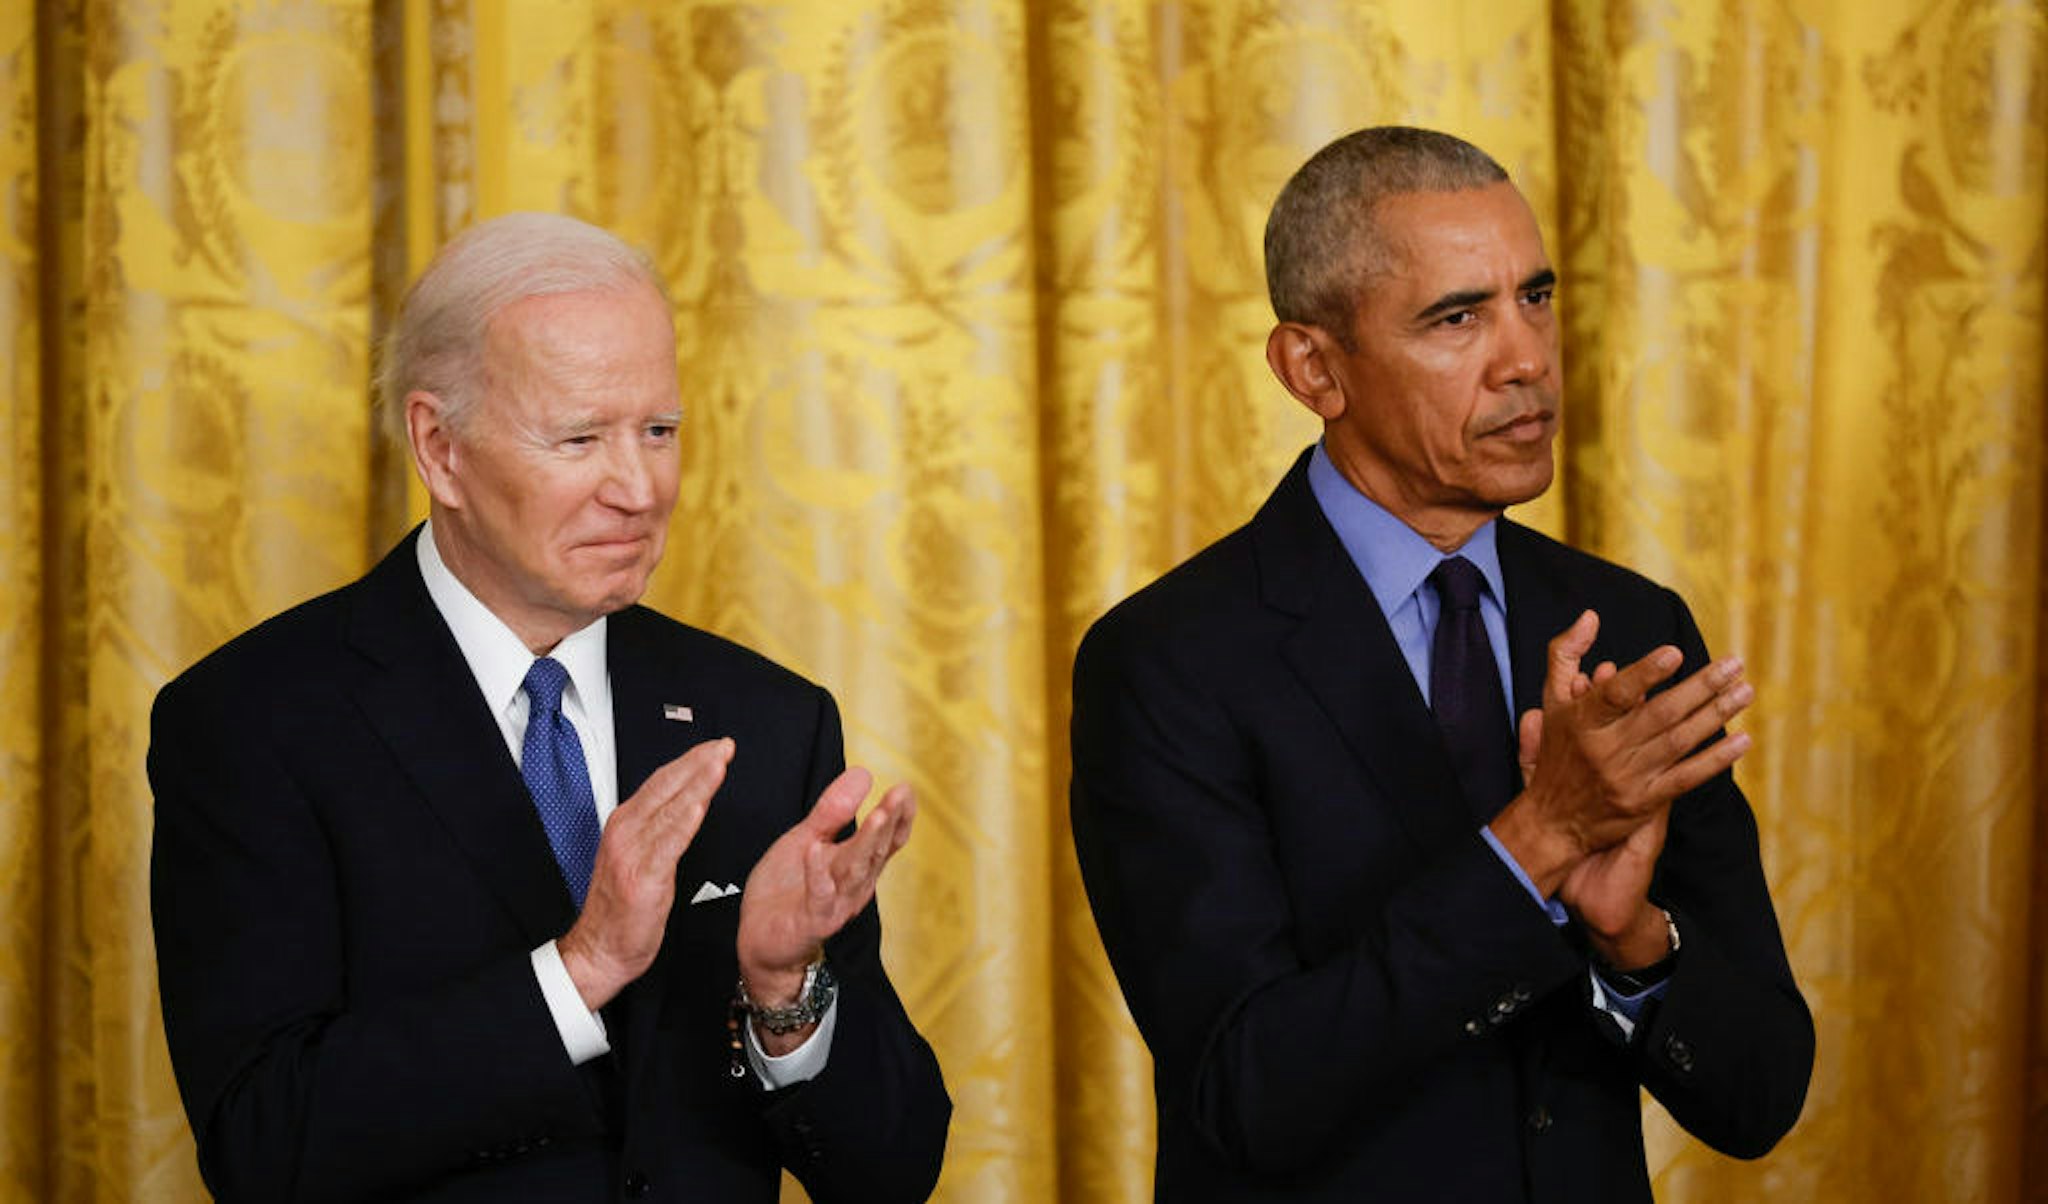 WASHINGTON, DC - APRIL 5: U.S. President Joe Biden and former President Barack Obama attend an event to mark the 2010 passage of the Affordable Care Act in the East Room of the White House on April 5, 2022 in Washington, DC. With then-Vice President Joe Biden by his side, Obama signed 'Obamacare' into law on March 23, 2010. (Photo by Chip Somodevilla/Getty Images)